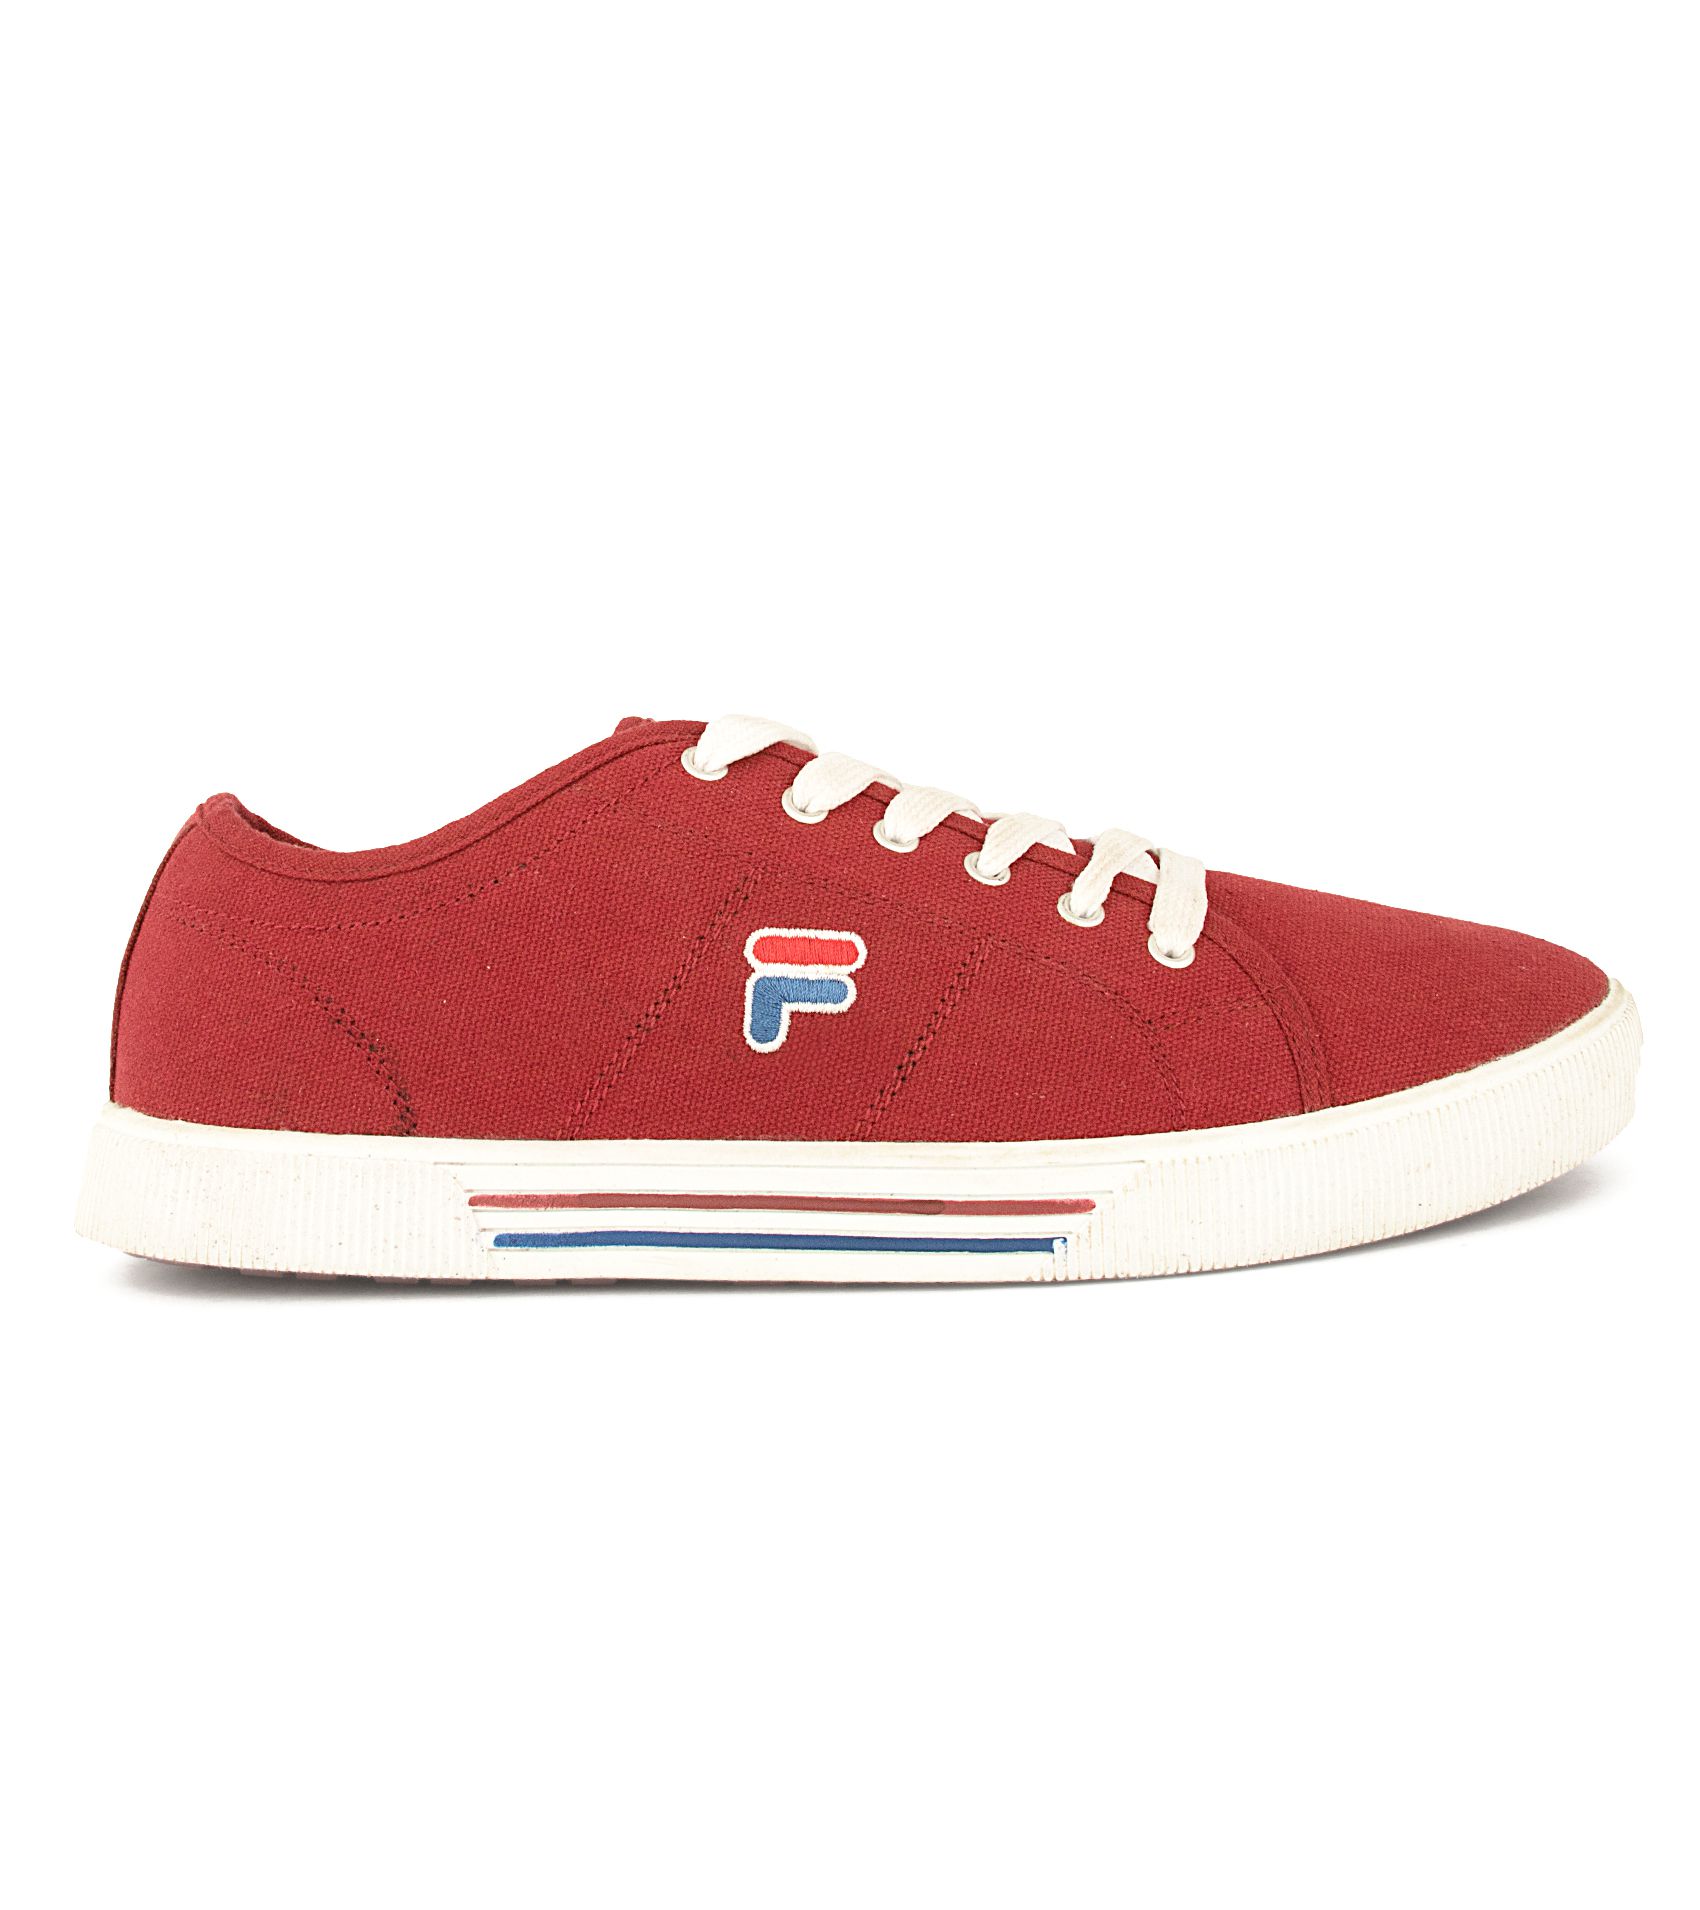 Red Canvas Shoes Buy Fila Red Shoes at Best Prices in India on Snapdeal